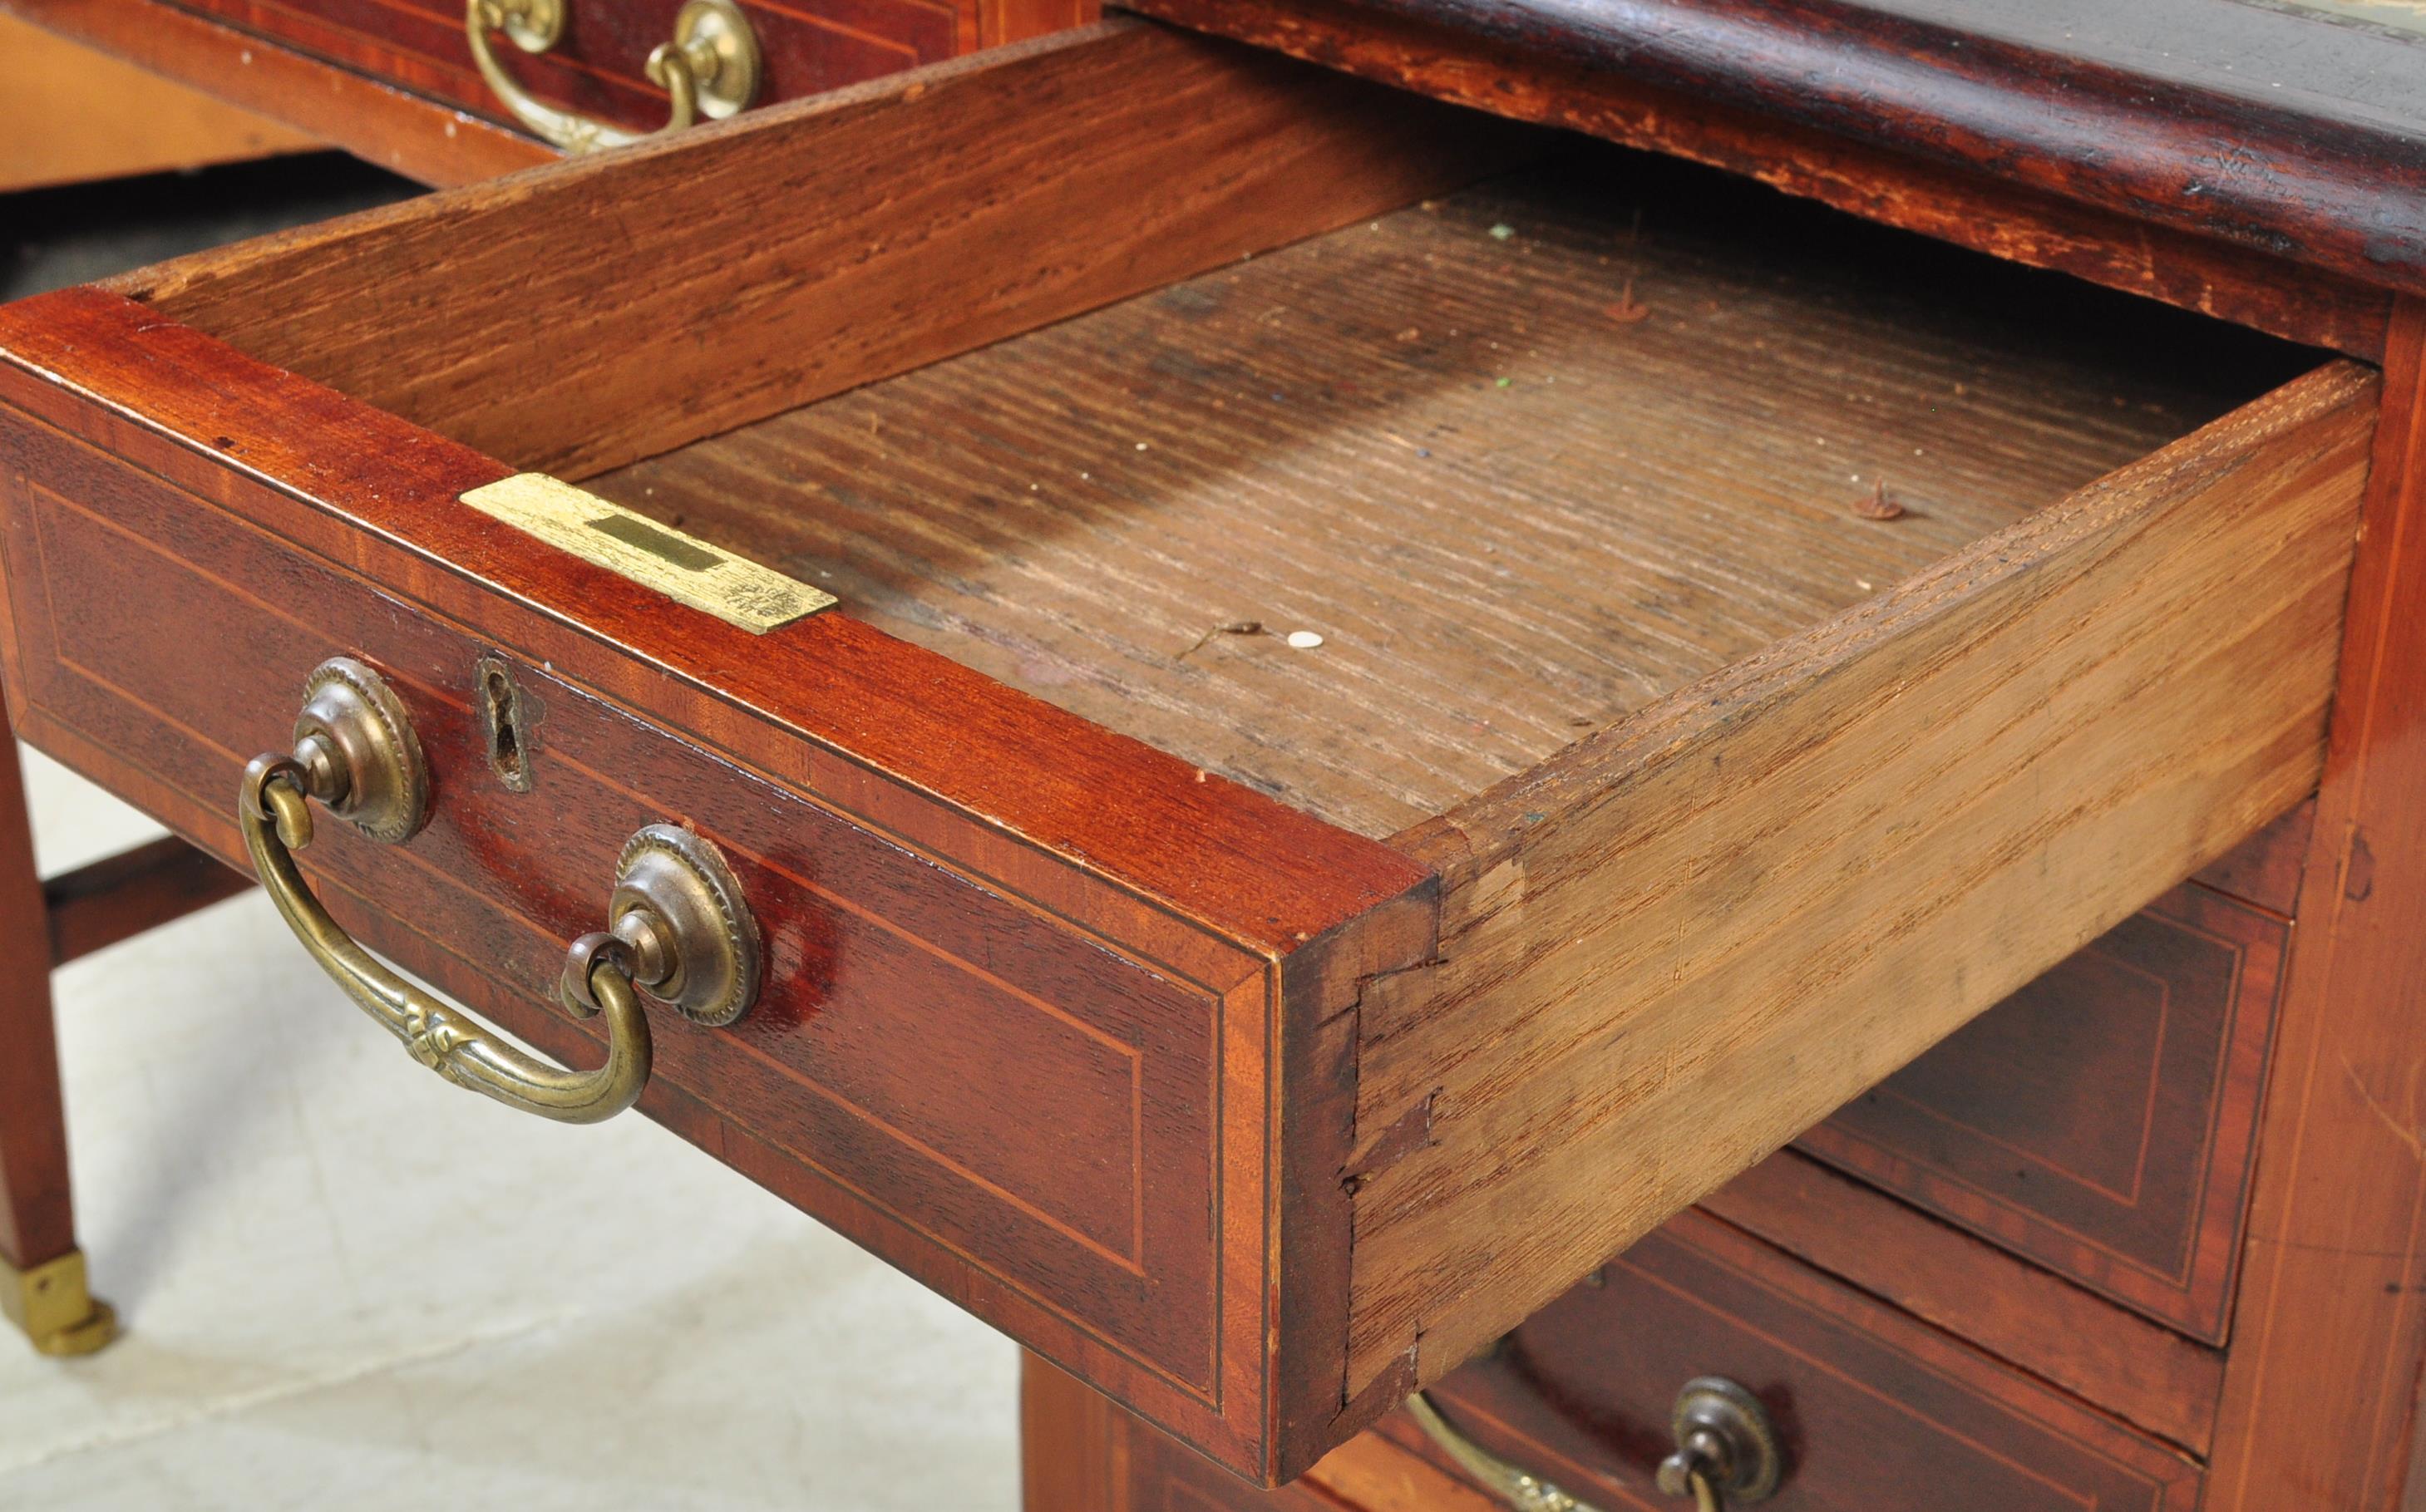 AN EDWARDIAN MAHOGANY LEATHER TOP WRITING DESK/TABLE - Image 5 of 7